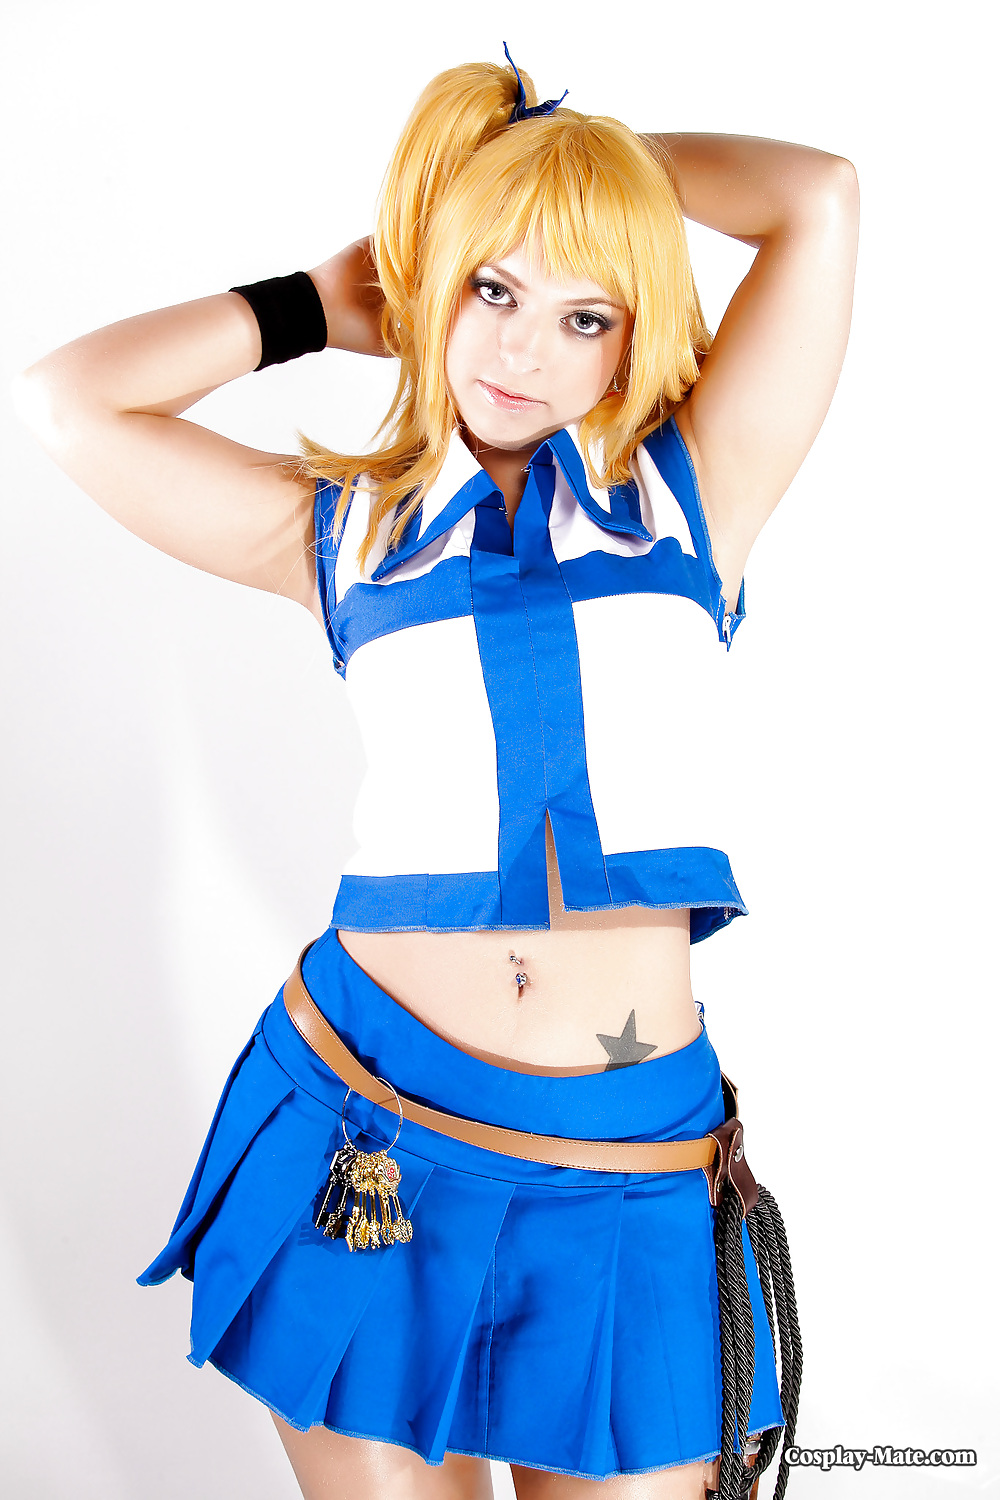 Lucy cuorefilia cosplay
 #18987484